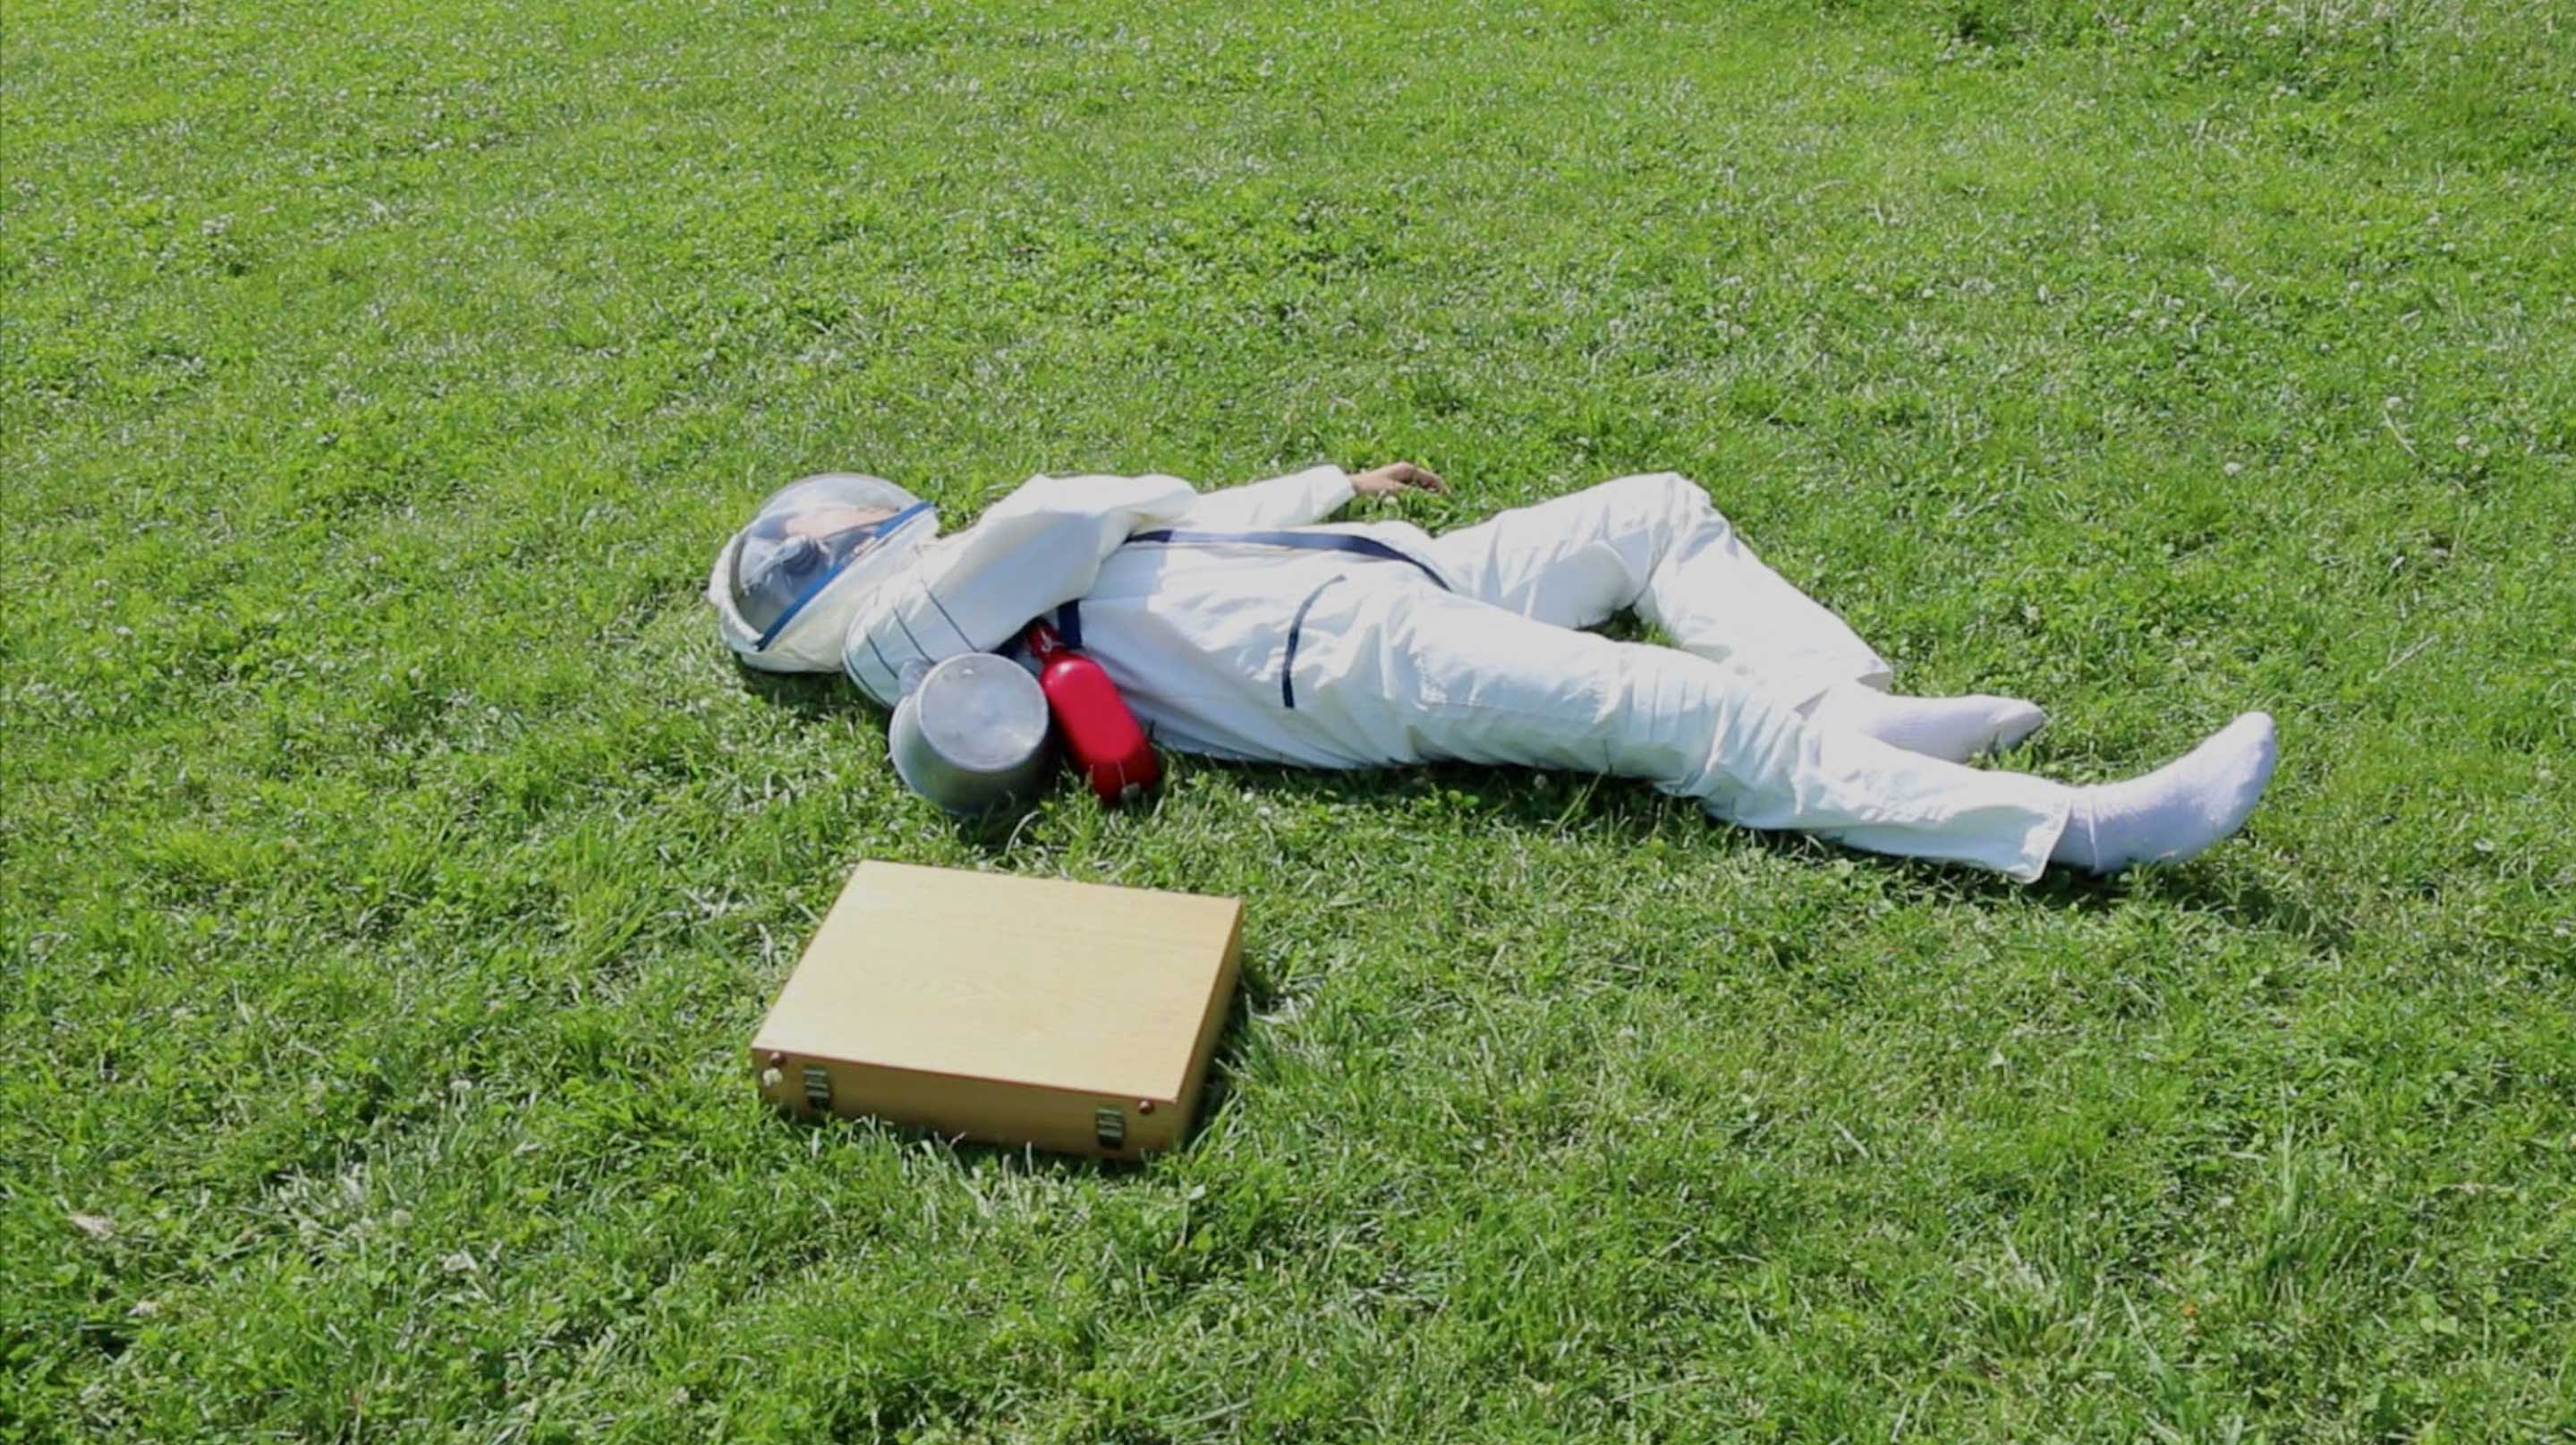 A person in an astronaut uniform with a space helmet lays on the grass next to a golden briefcase.